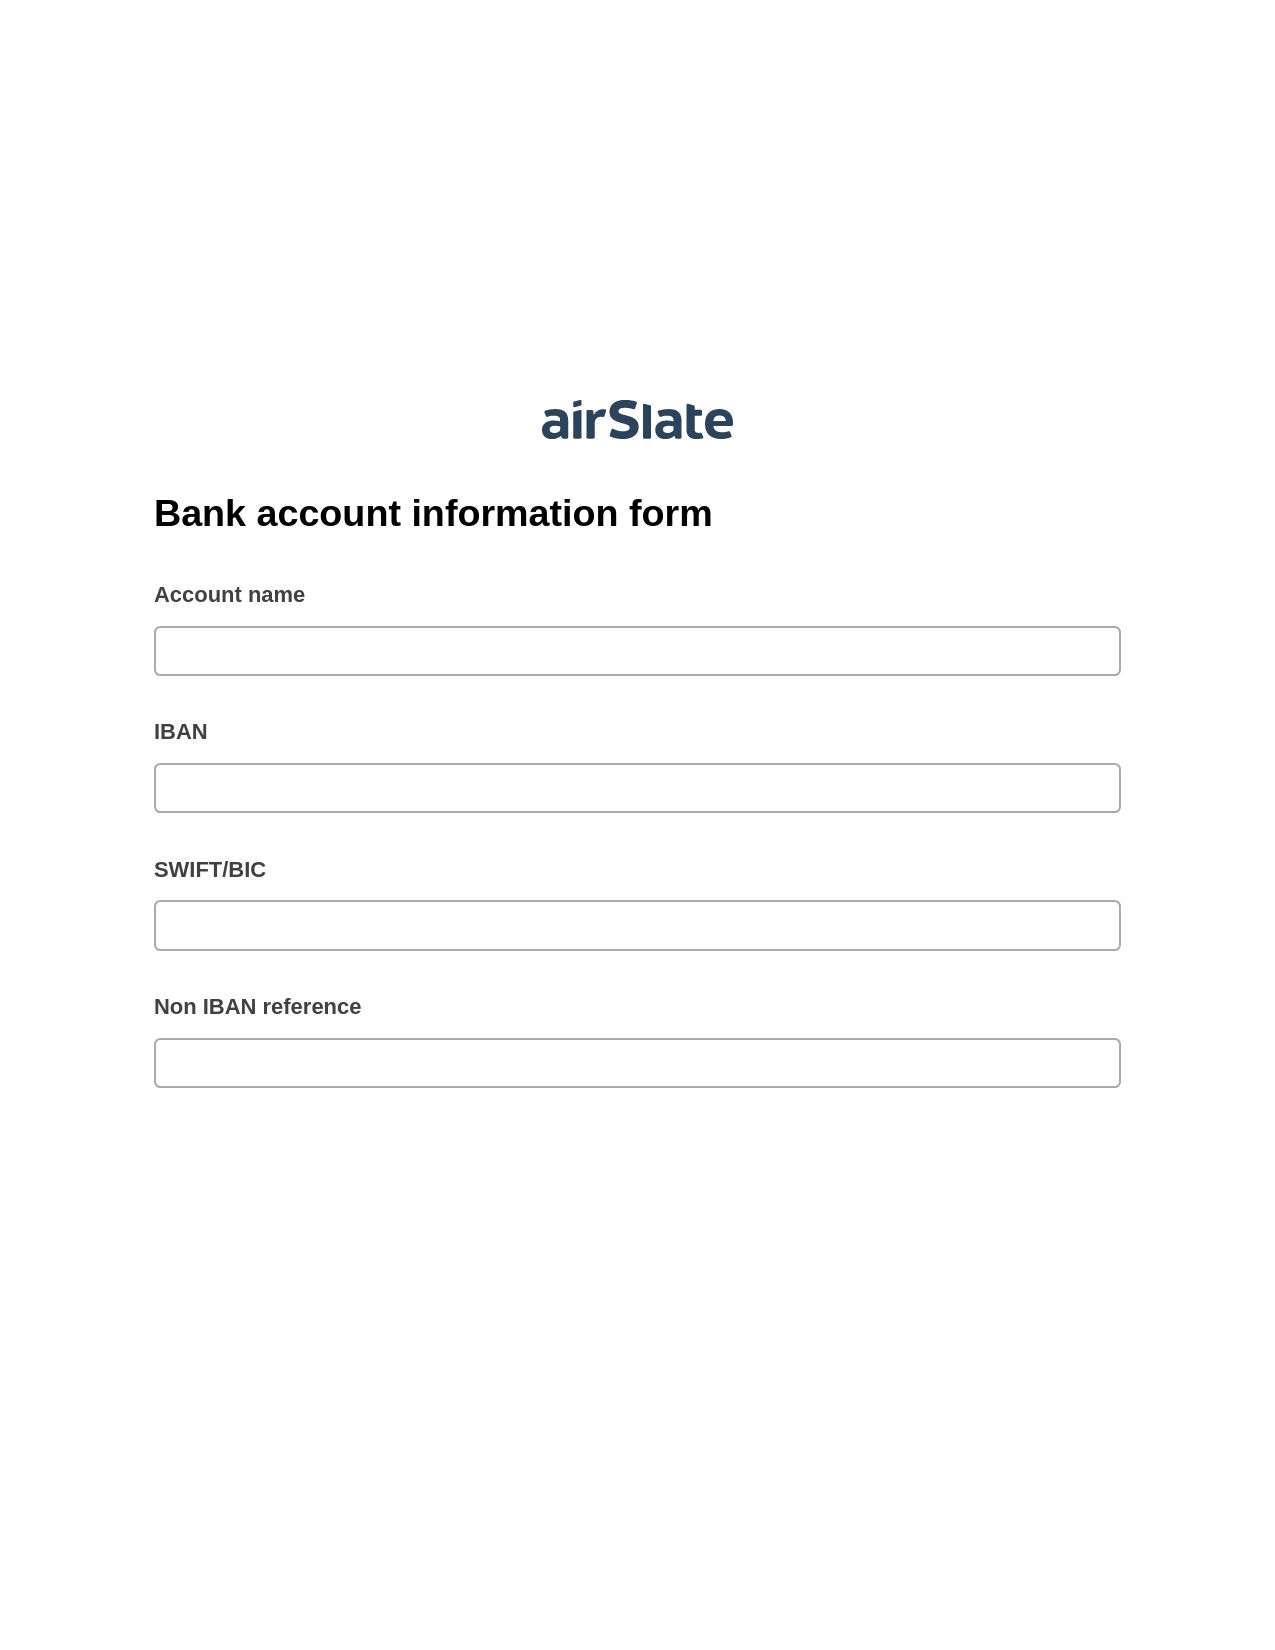 Bank account information form Pre-fill from Google Sheet Dropdown Options Bot, Lock the slate bot, Export to MySQL Bot